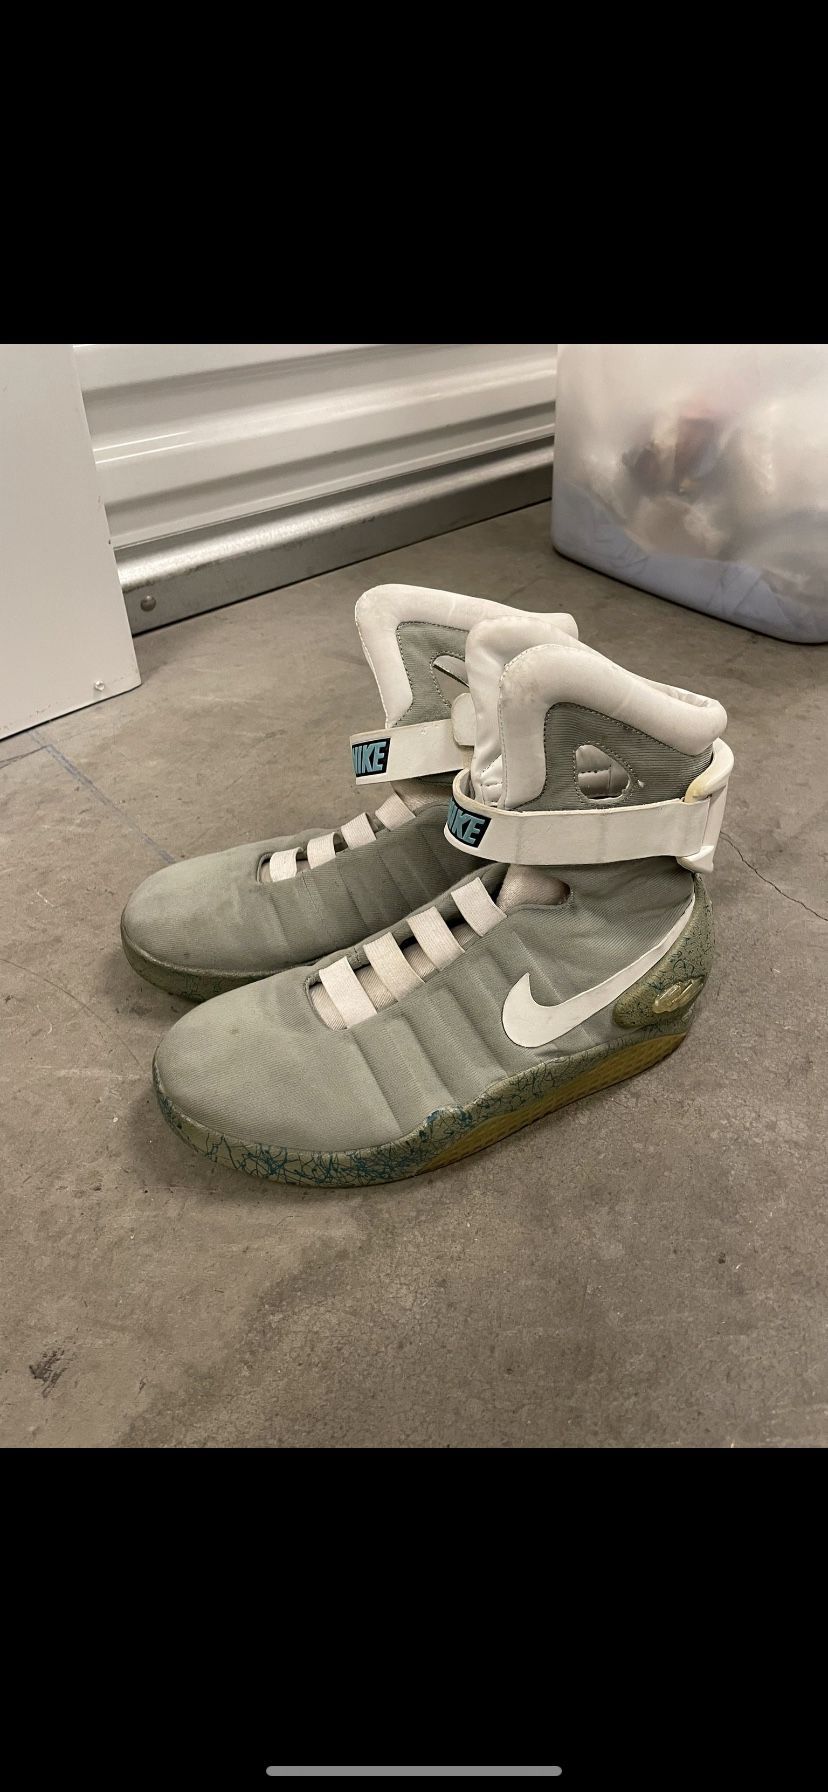 Nikes Mags From Back to the future 